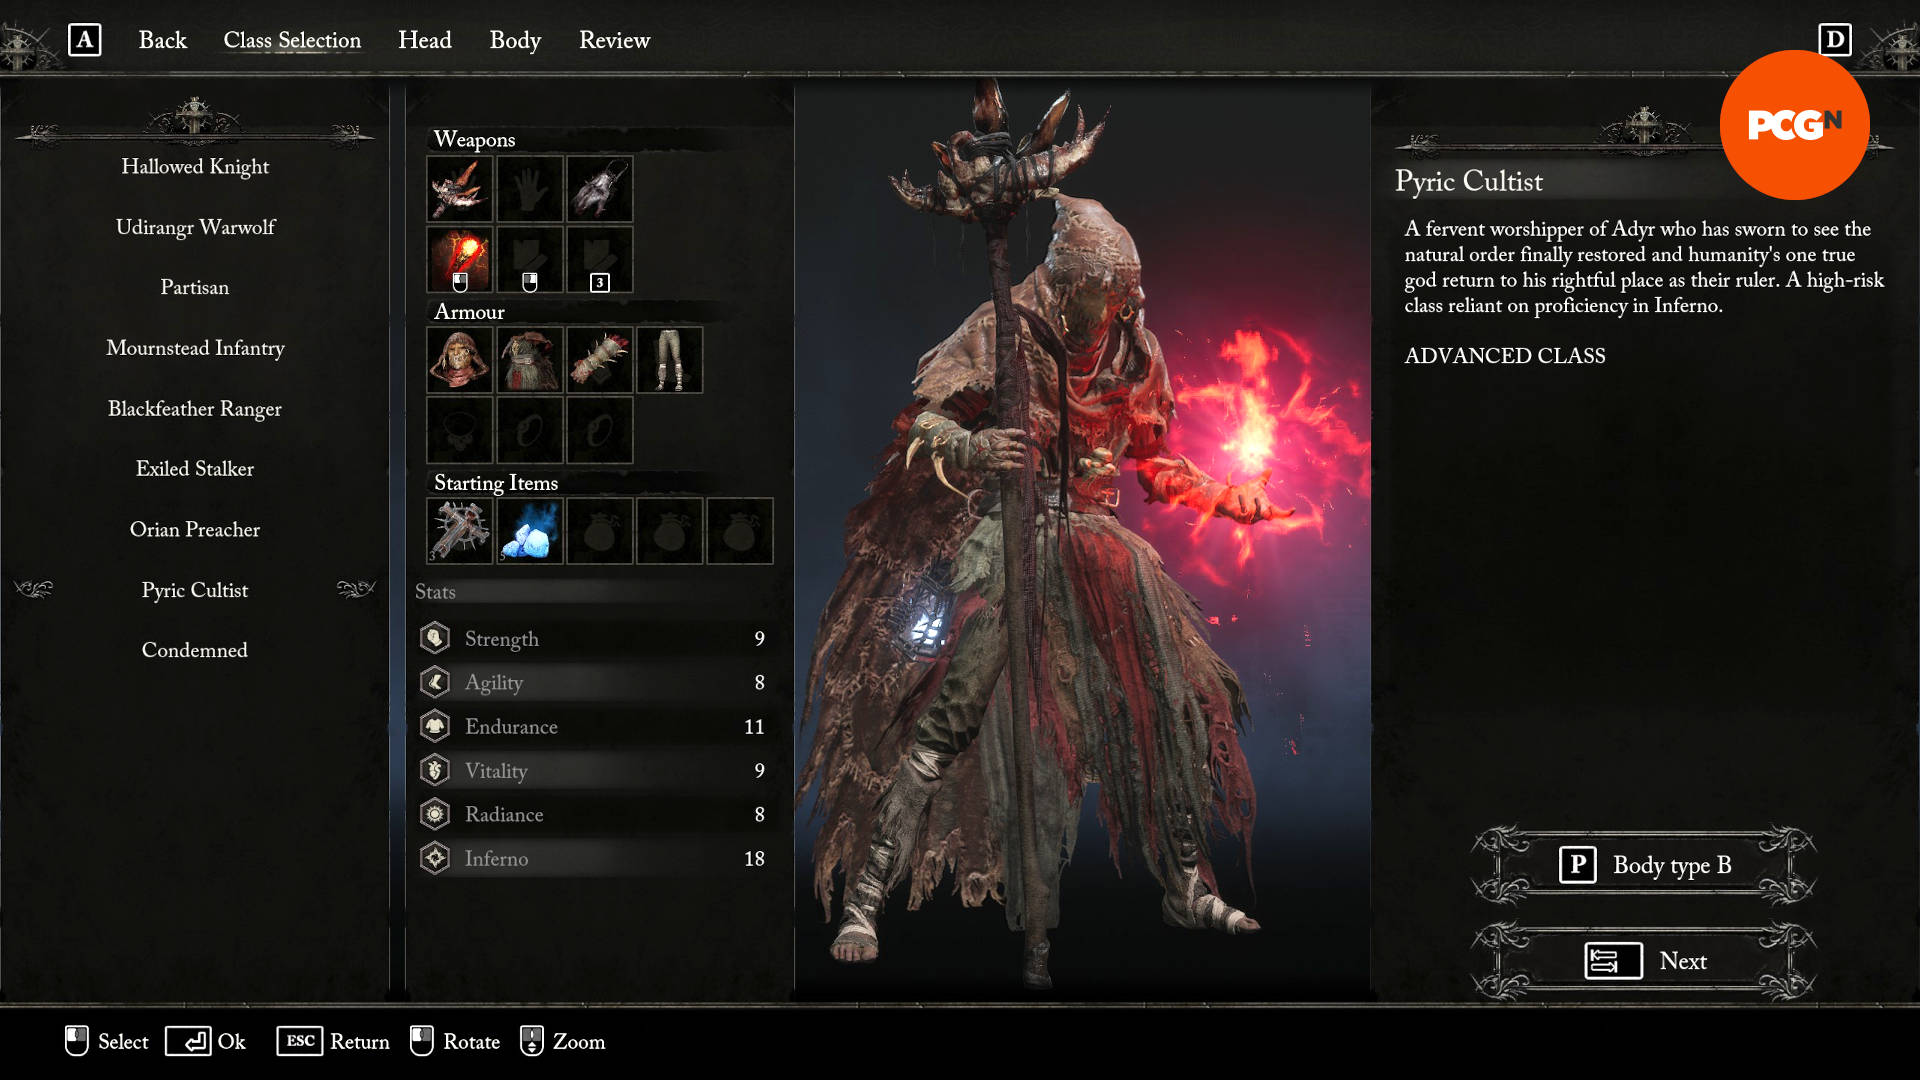 All 13 Lords of the Fallen classes and how to unlock them